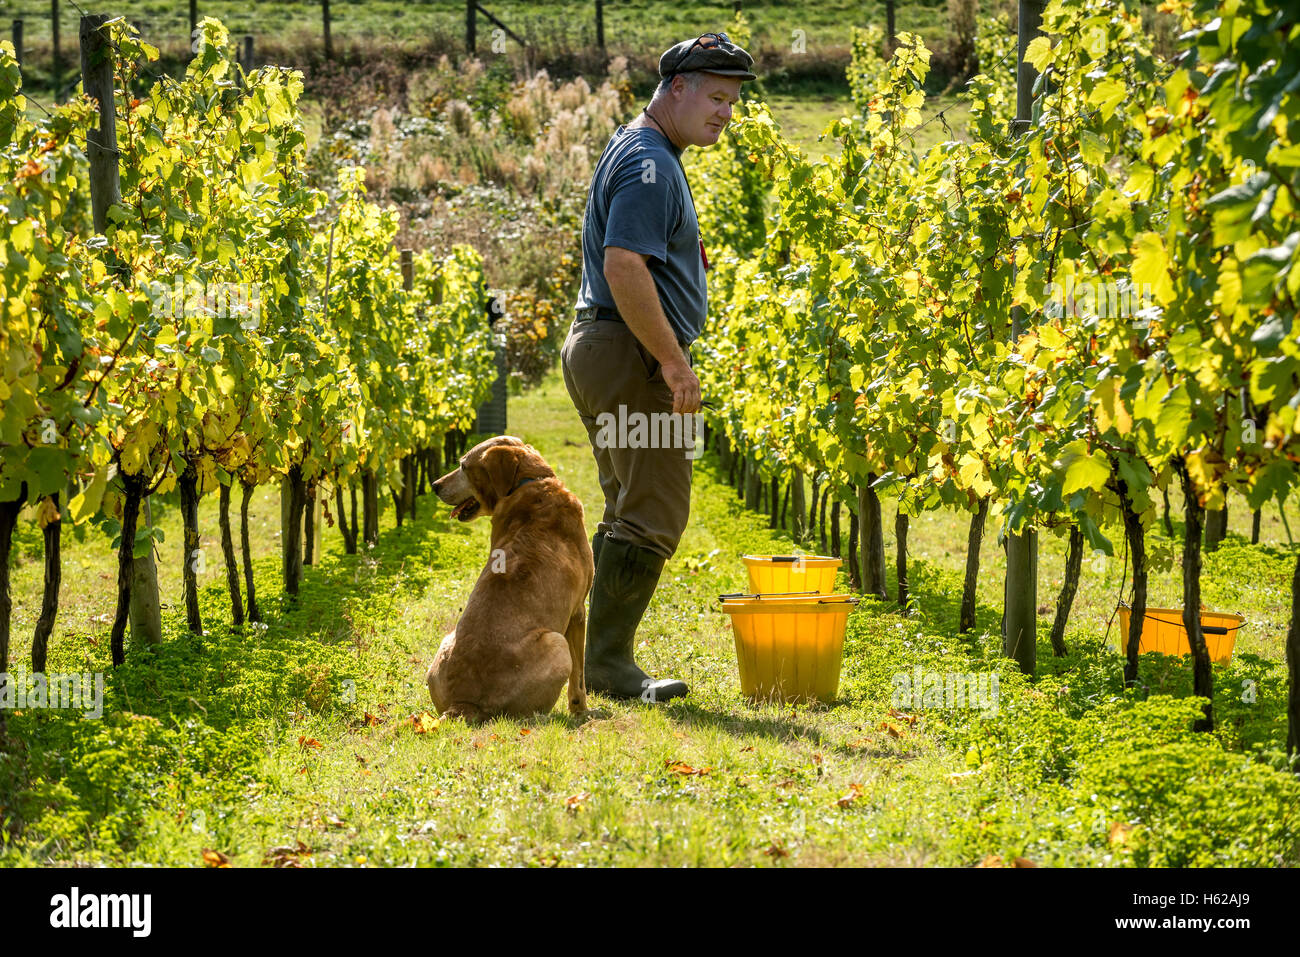 Edmund Limerick, a volunteer grape-picker at the Breaky Bottom vineyard, near Lewes in East Sussex, with his dog Redmund. Englis Stock Photo